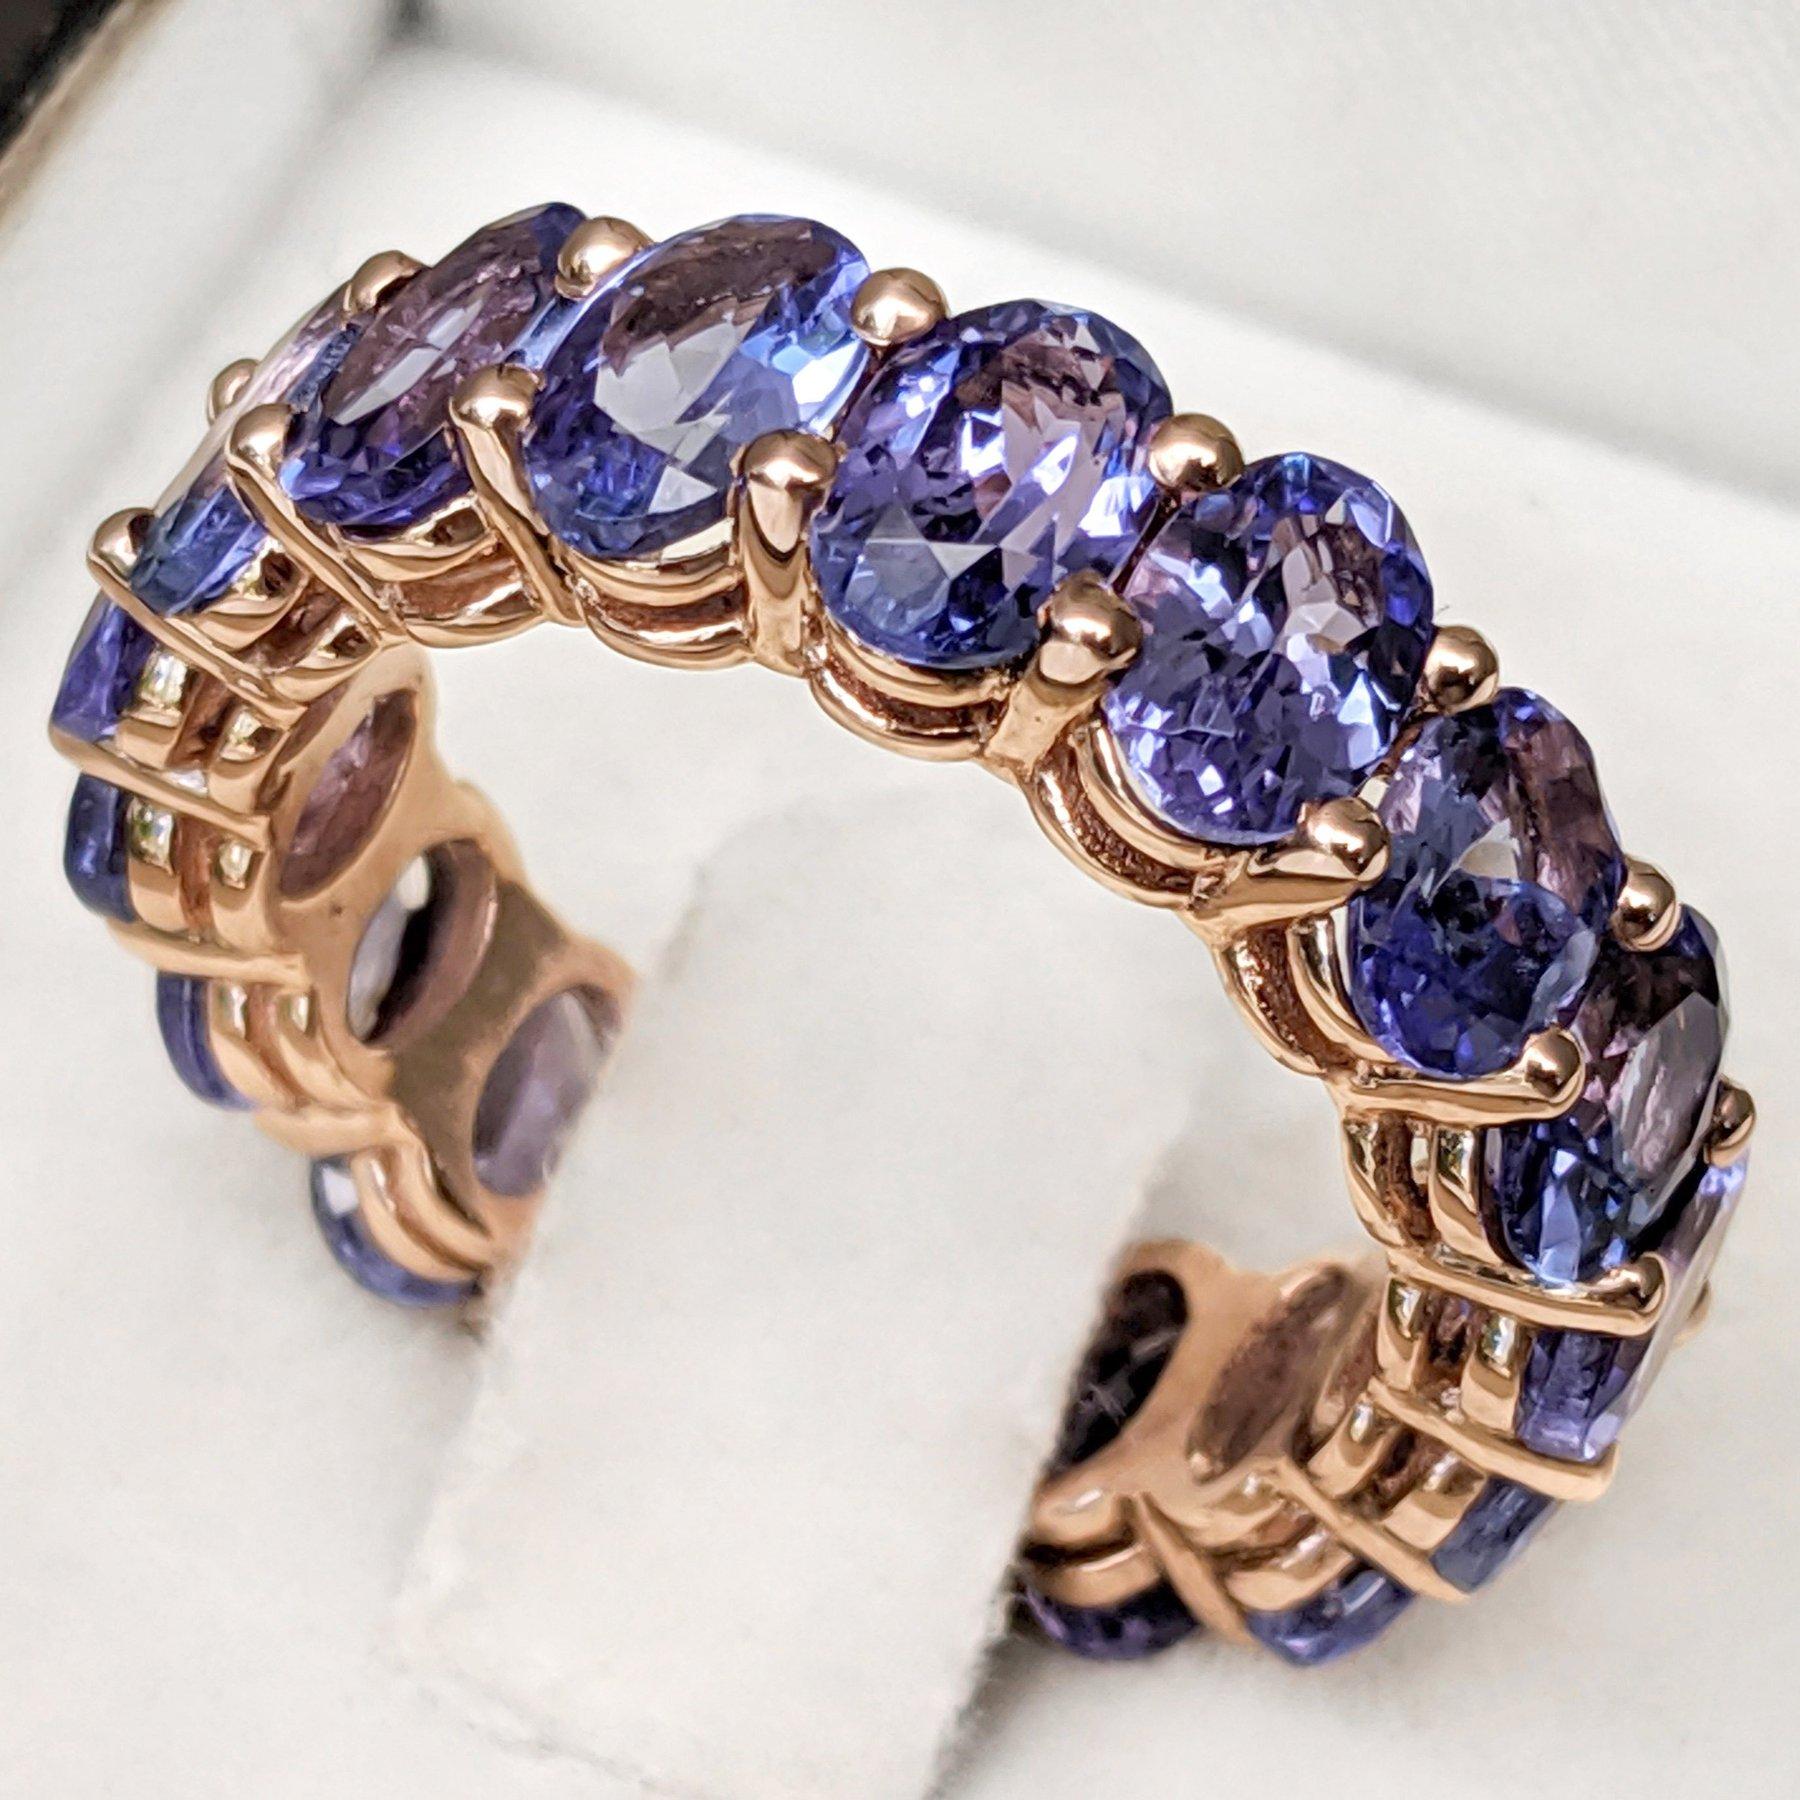 Oval Cut NO RESERVE! 8.18 Carat Tanzanite Eternity Band - 14 kt. Rose Gold - Ring